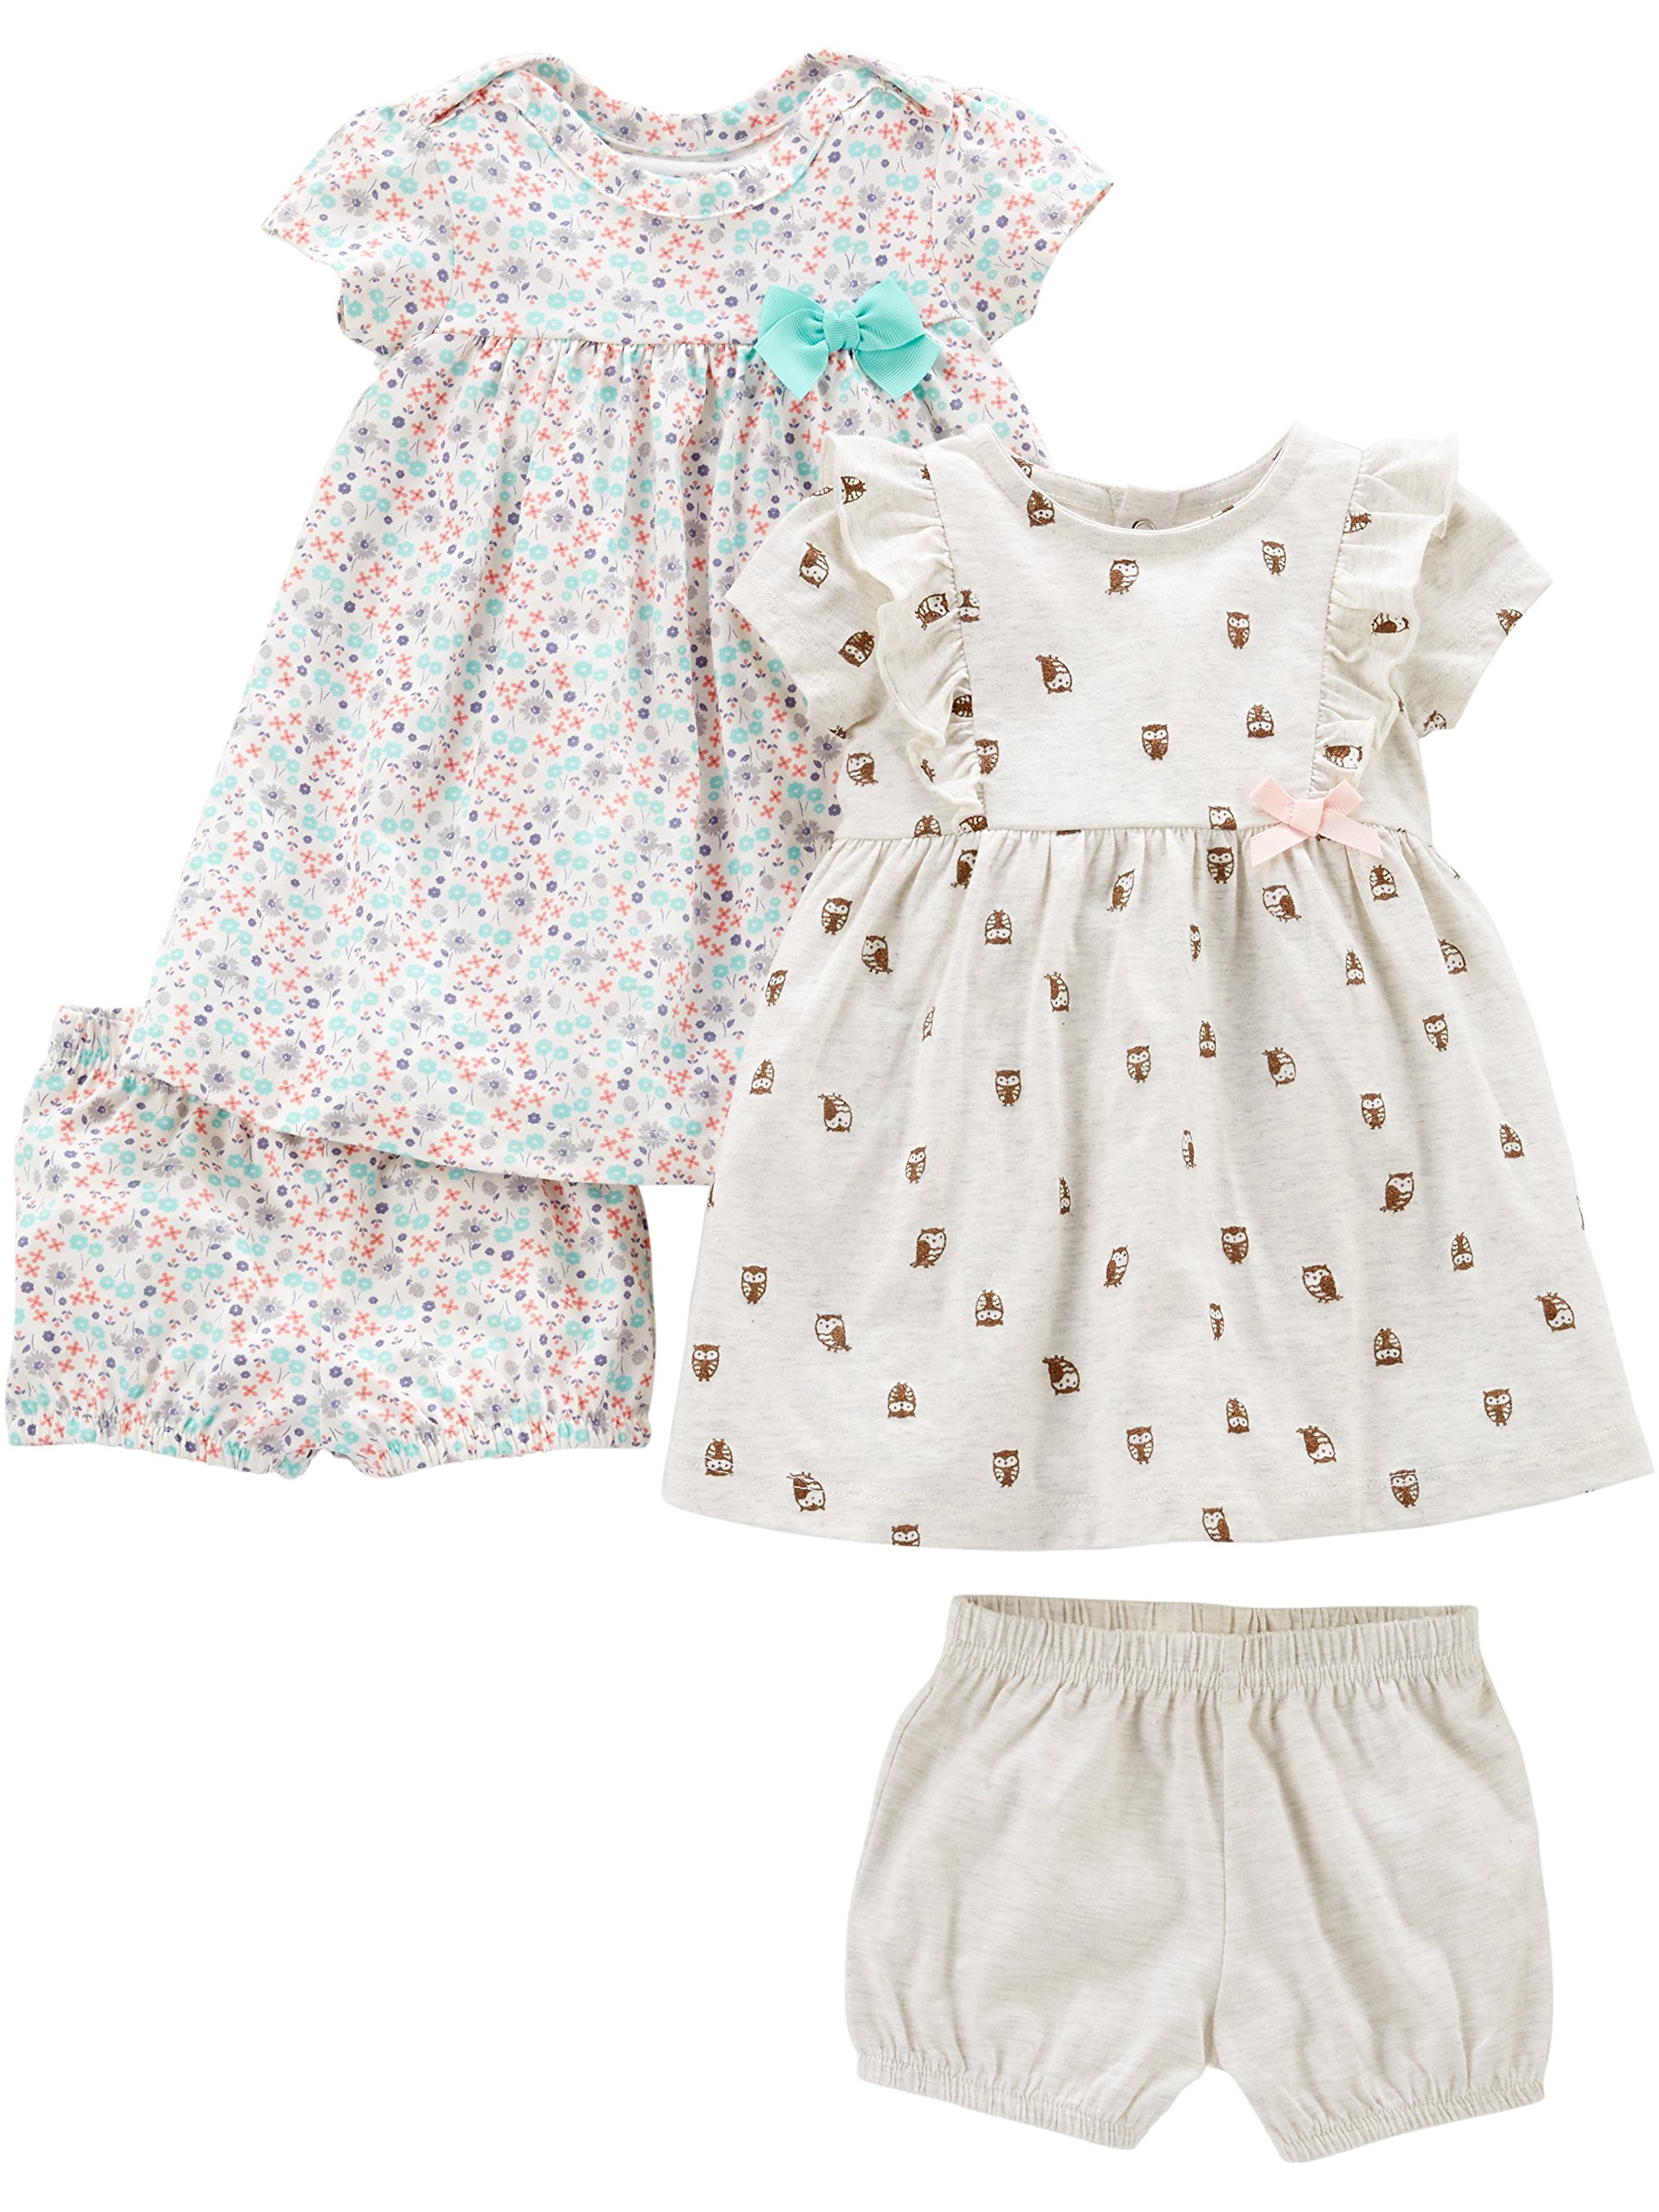 Simple Joys by Carter's Girls' Short-Sleeve and Sleeveless Dress Sets, Pack of 2